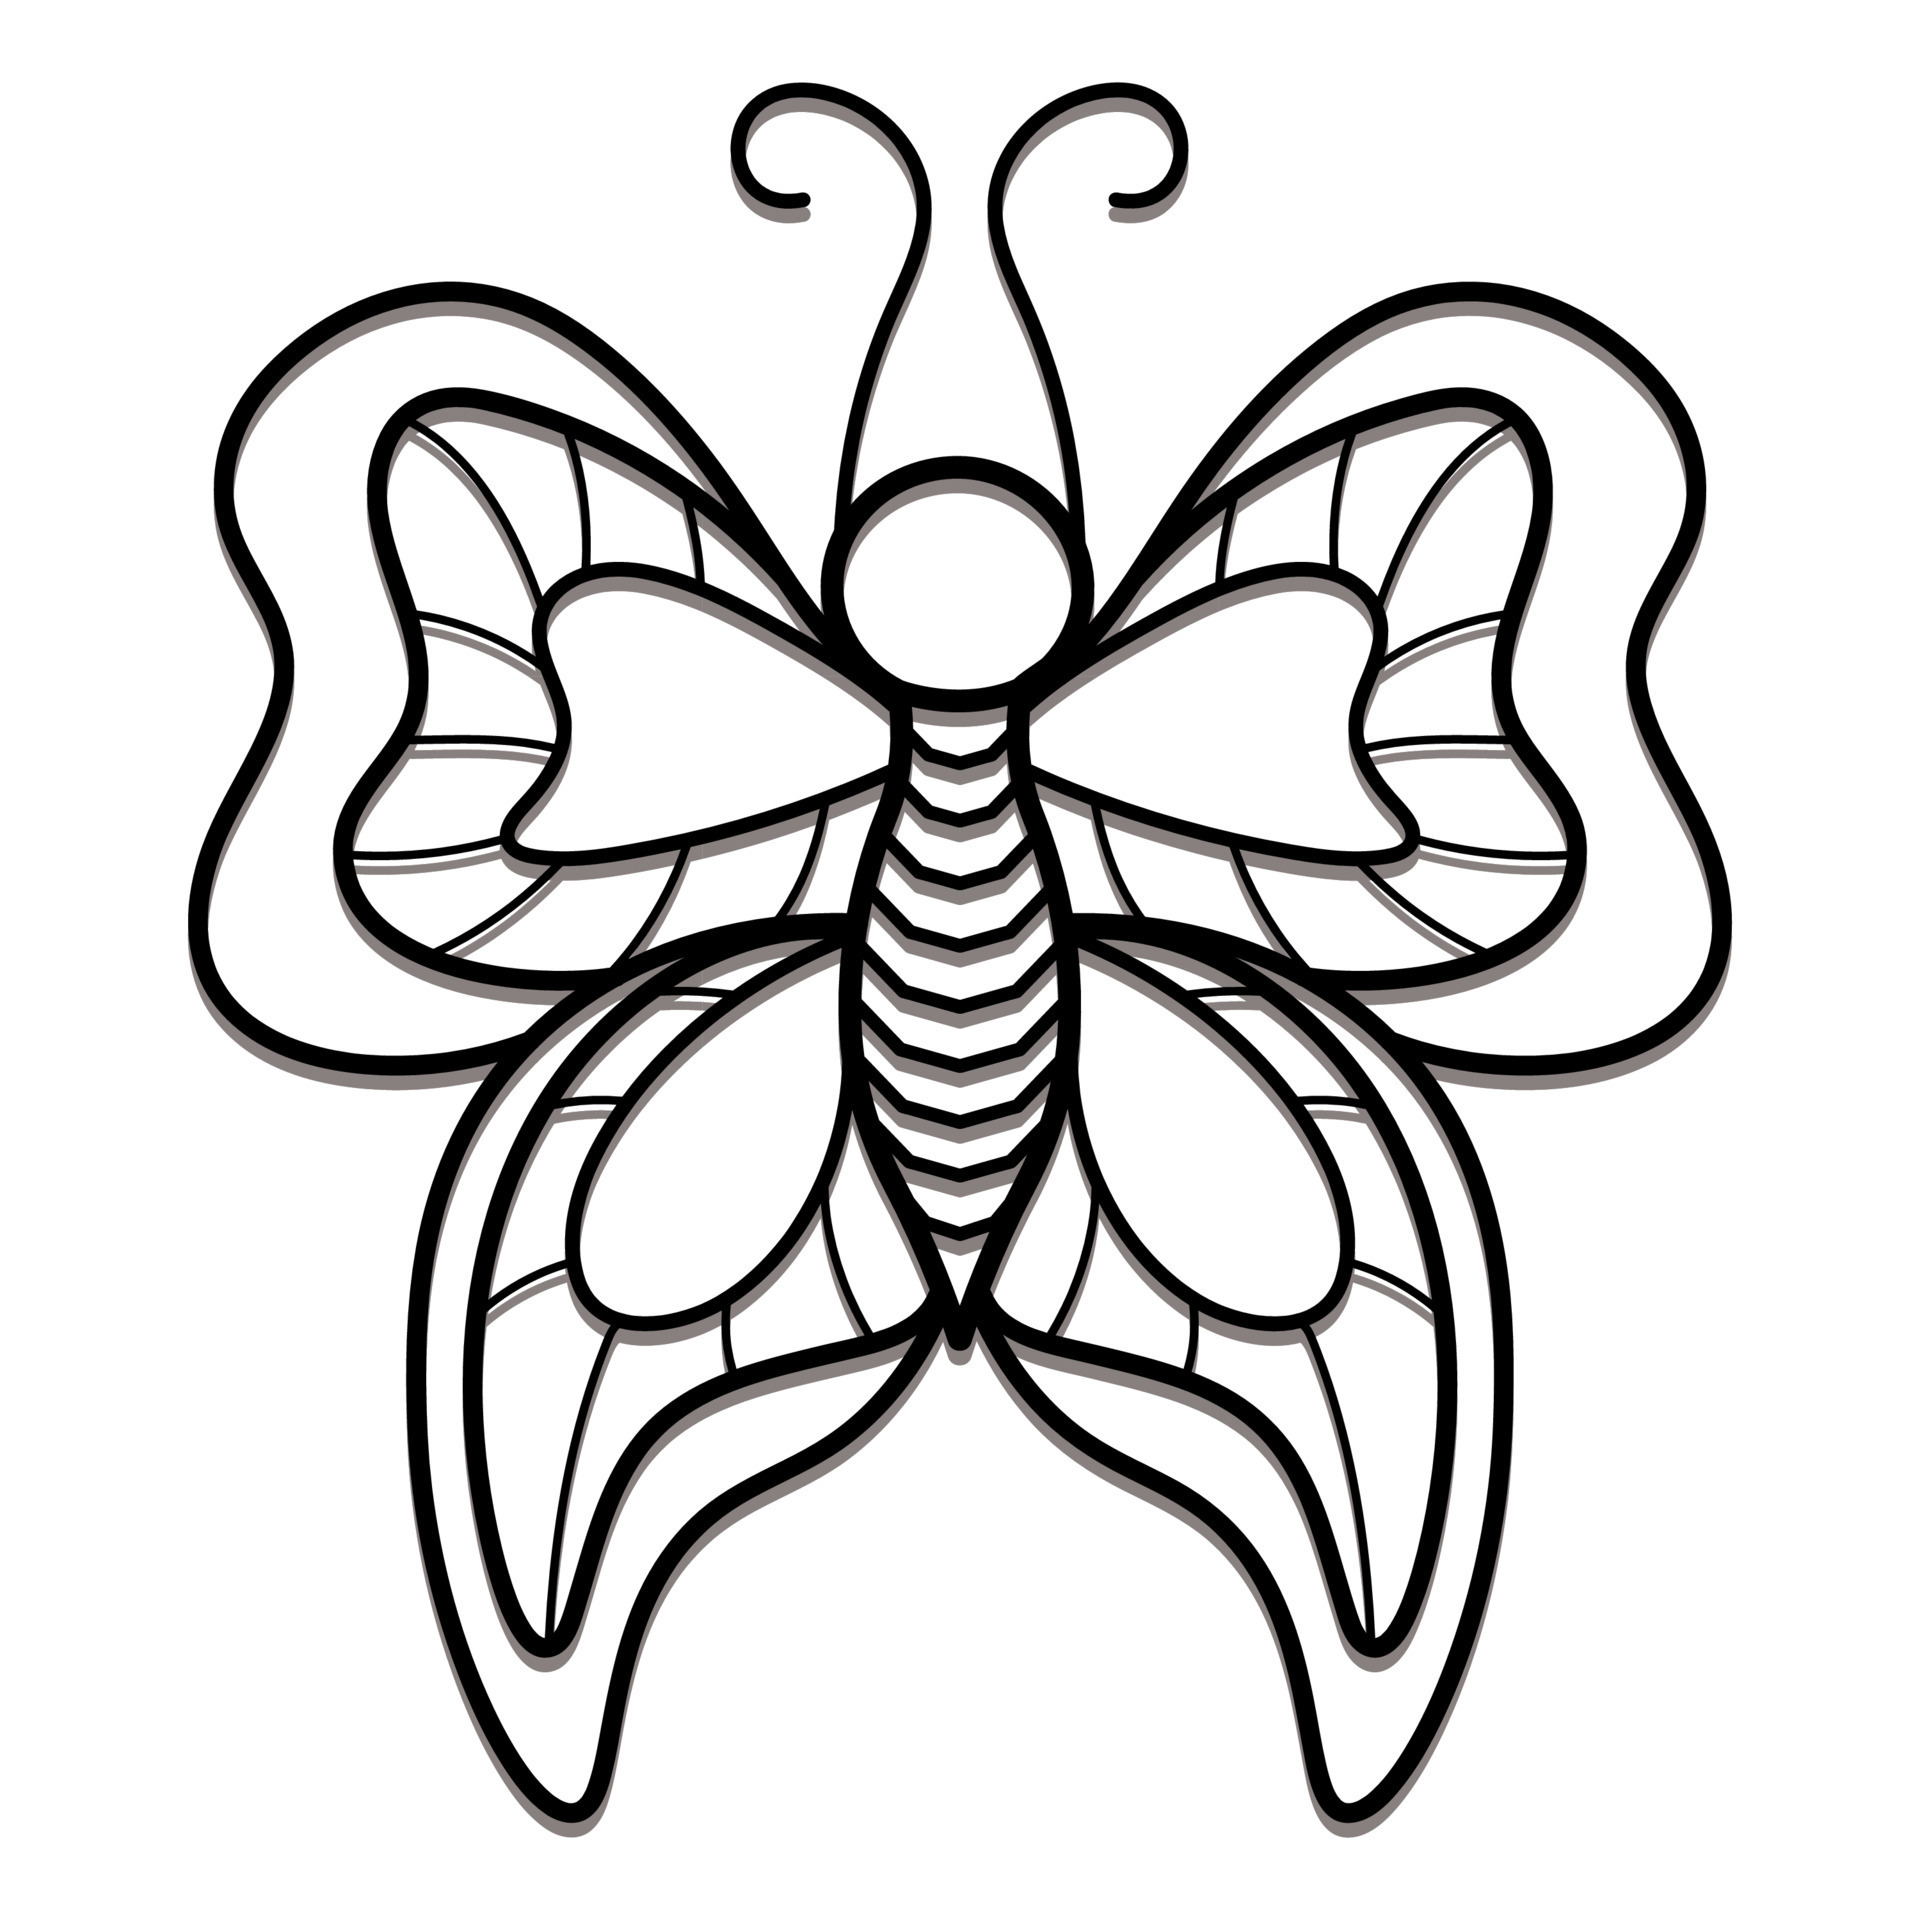 Outline drawing of butterfly. Vector... - Stock Illustration [104475310] -  PIXTA